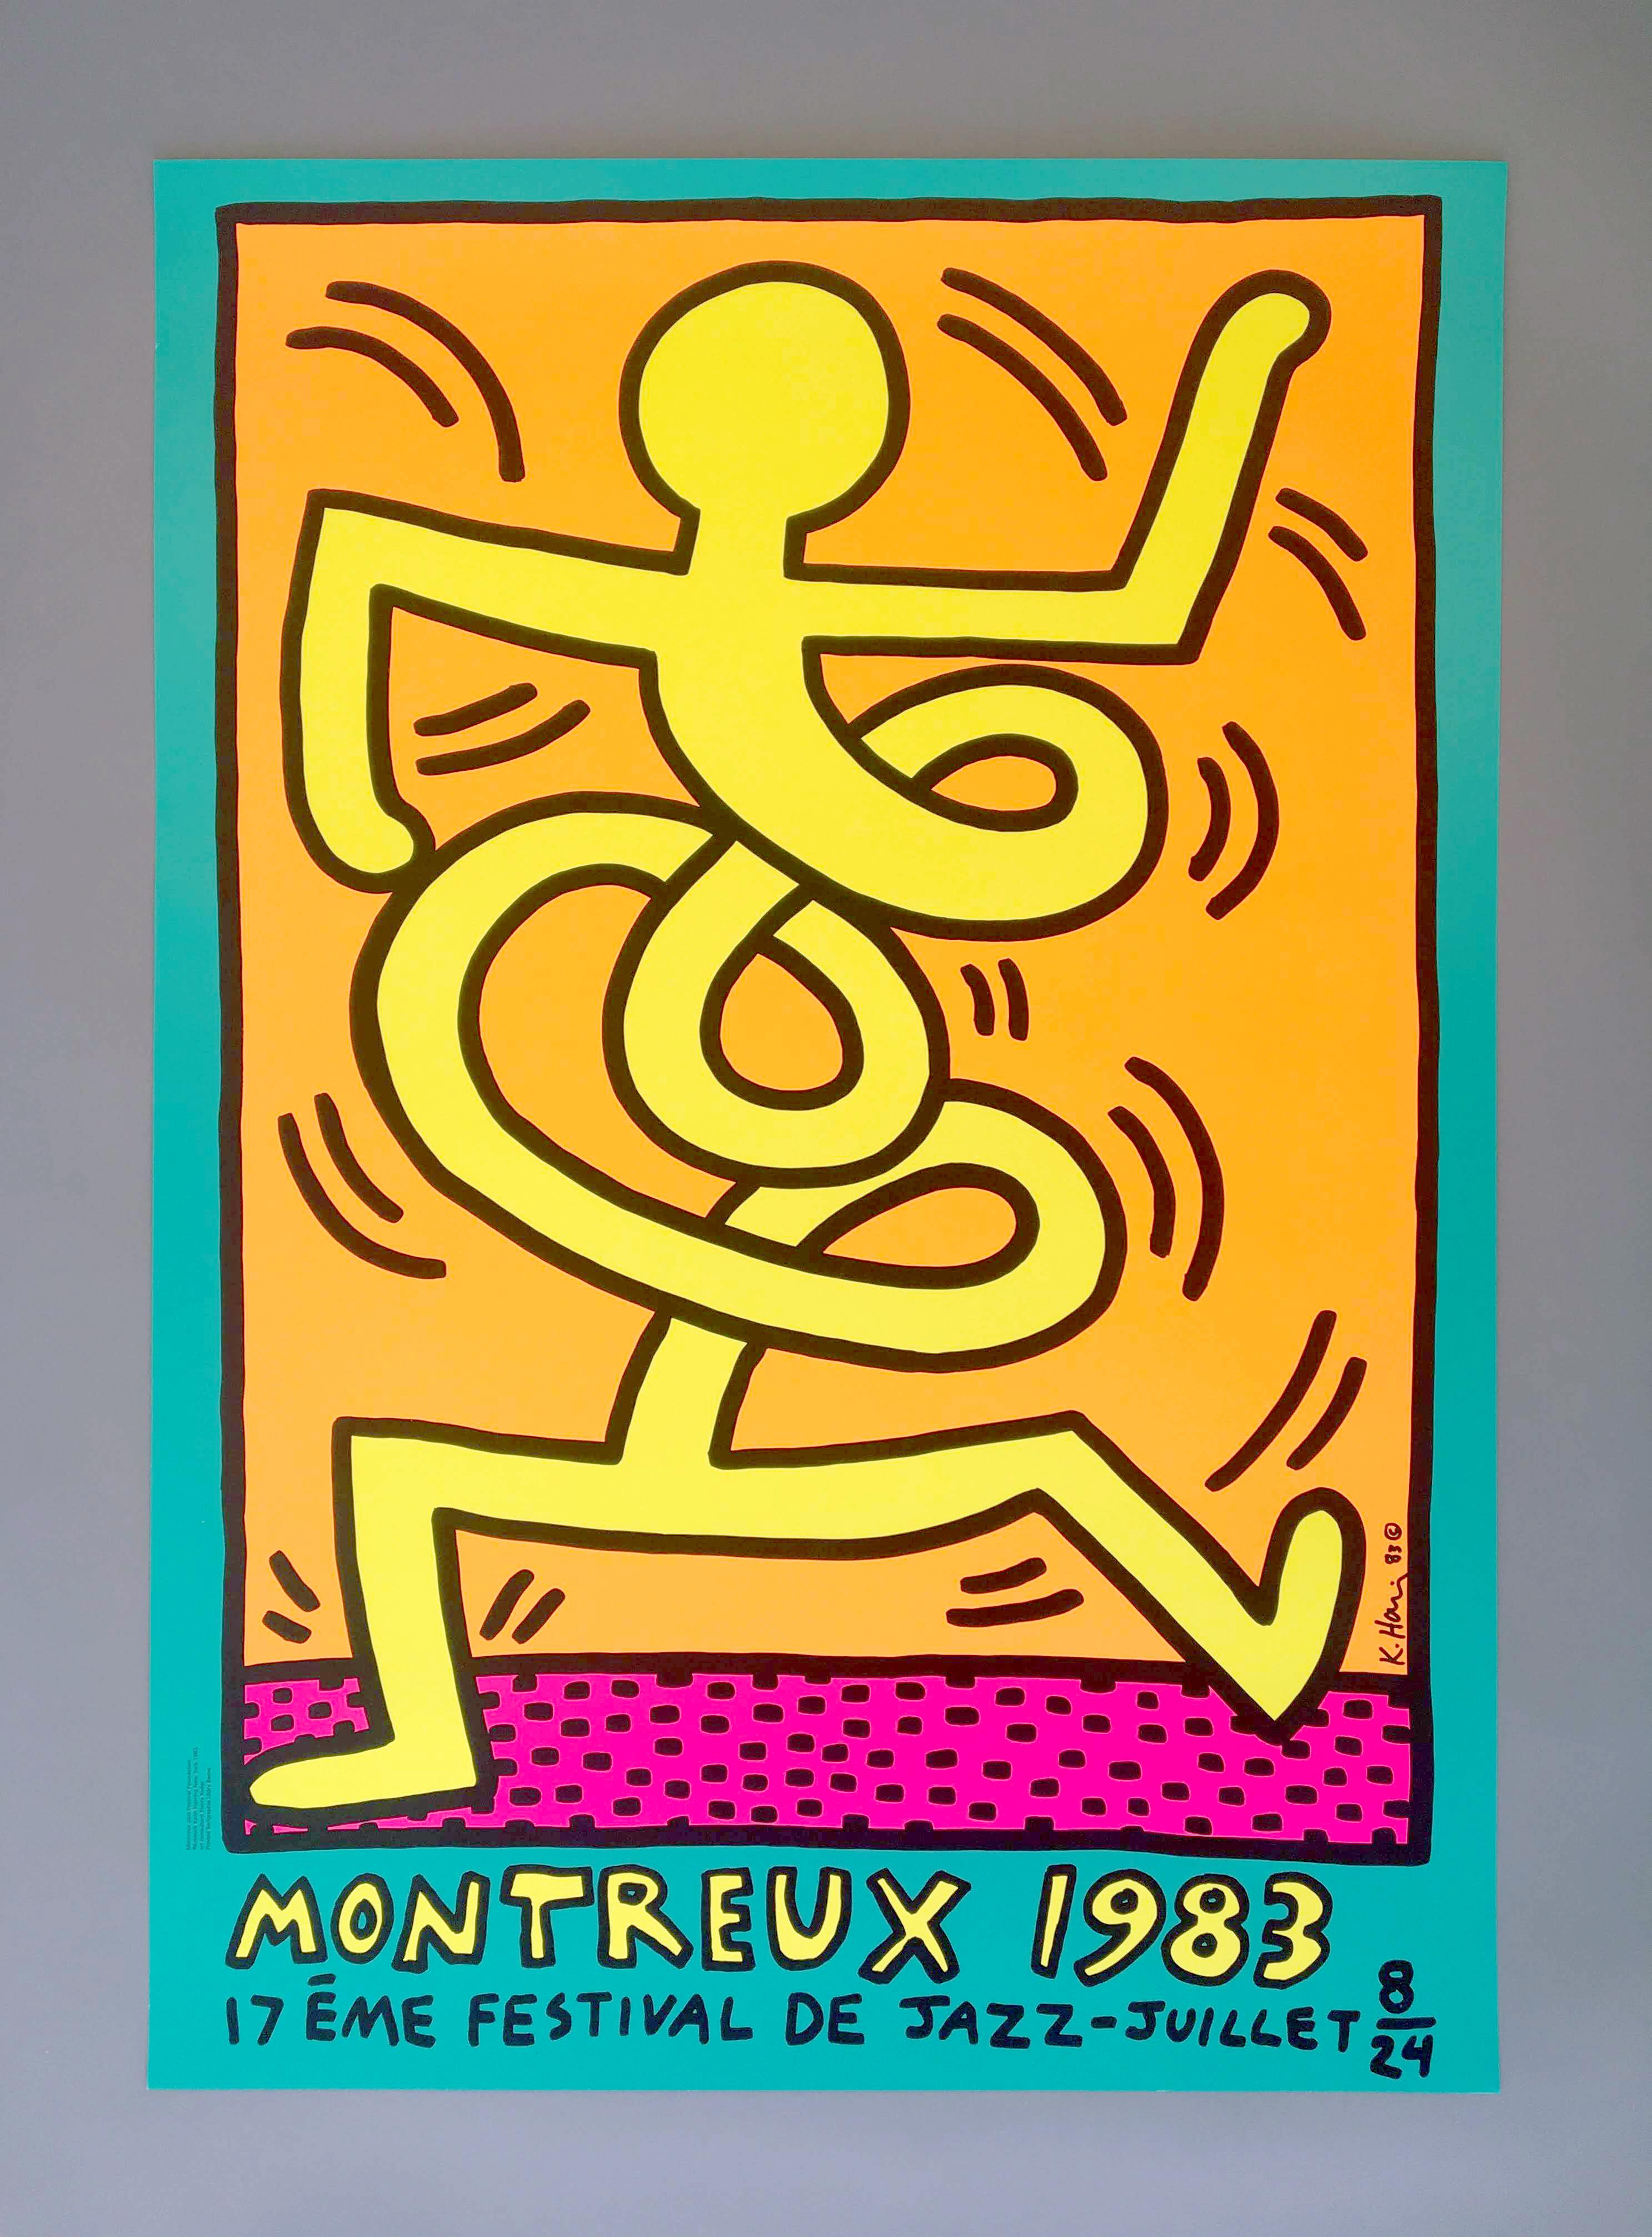 Keith Haring (United States, 1958-1990)
'Montreux Jazz Festival III', 1983
           
This iconic and colorful image was created as one in a series of three different images. Created to promote the Montreux Jazz Festival of 1983, held annually in